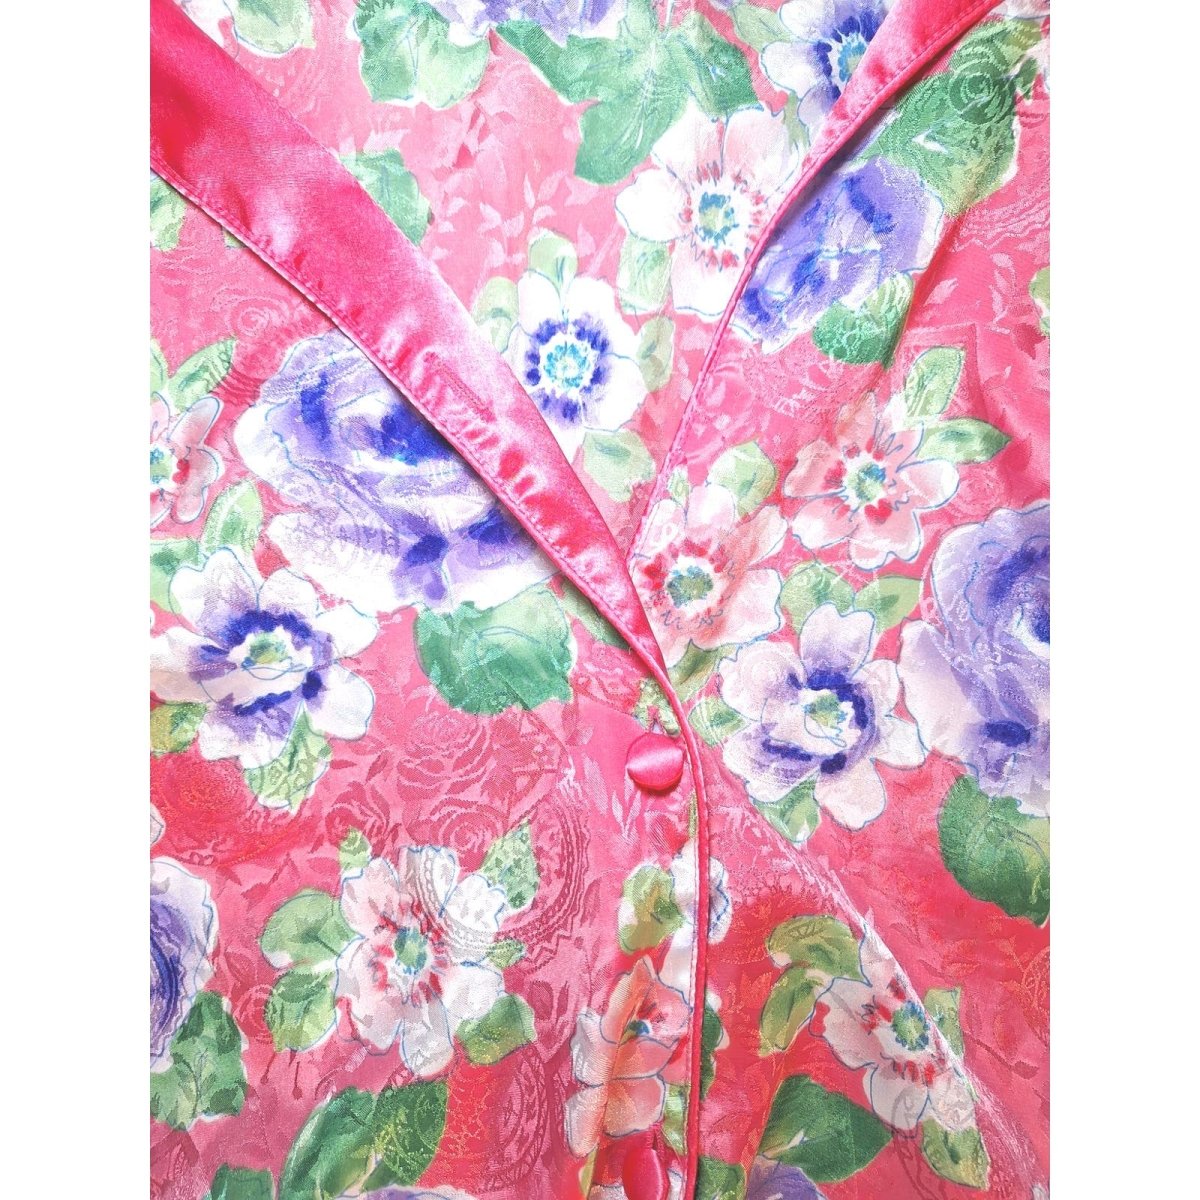 Vintage 90s VS Floral Embossed Satin Sleep Shirt Women Size M/L - themallvintage The Mall Vintage